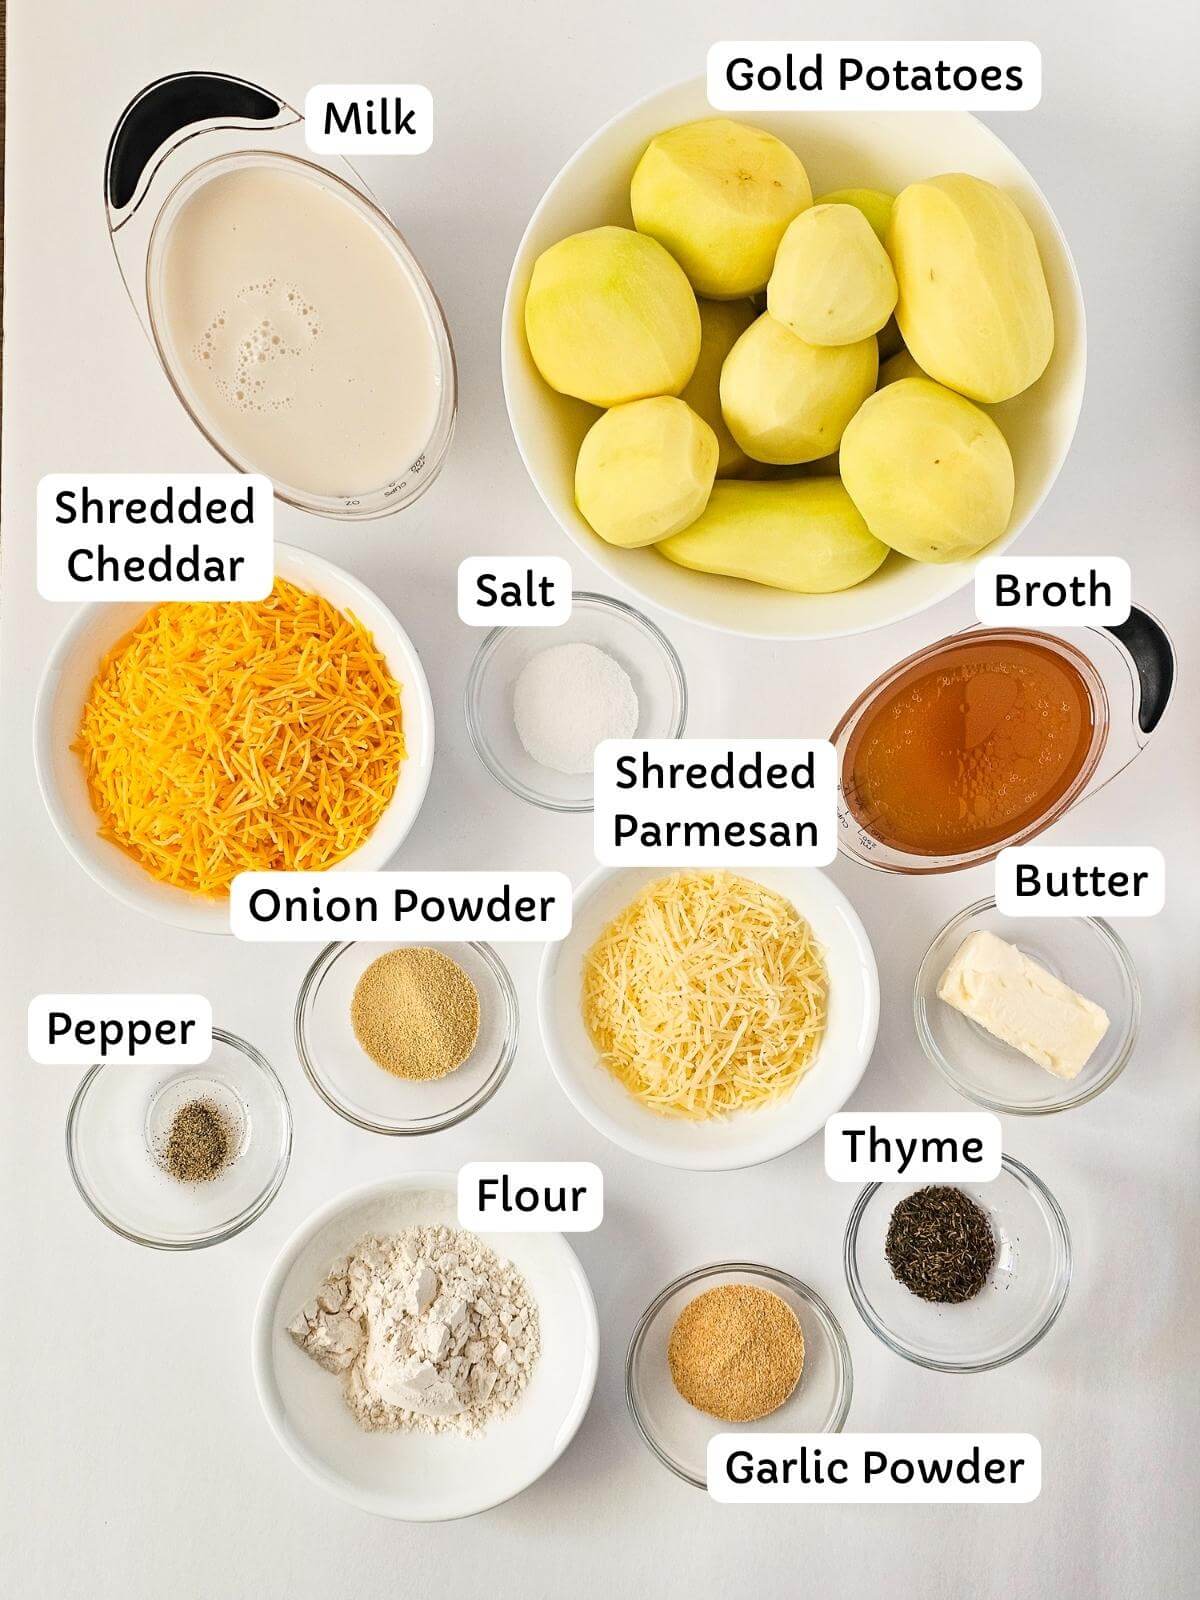 Labeled ingredients for making gluten free scalloped potatoes.